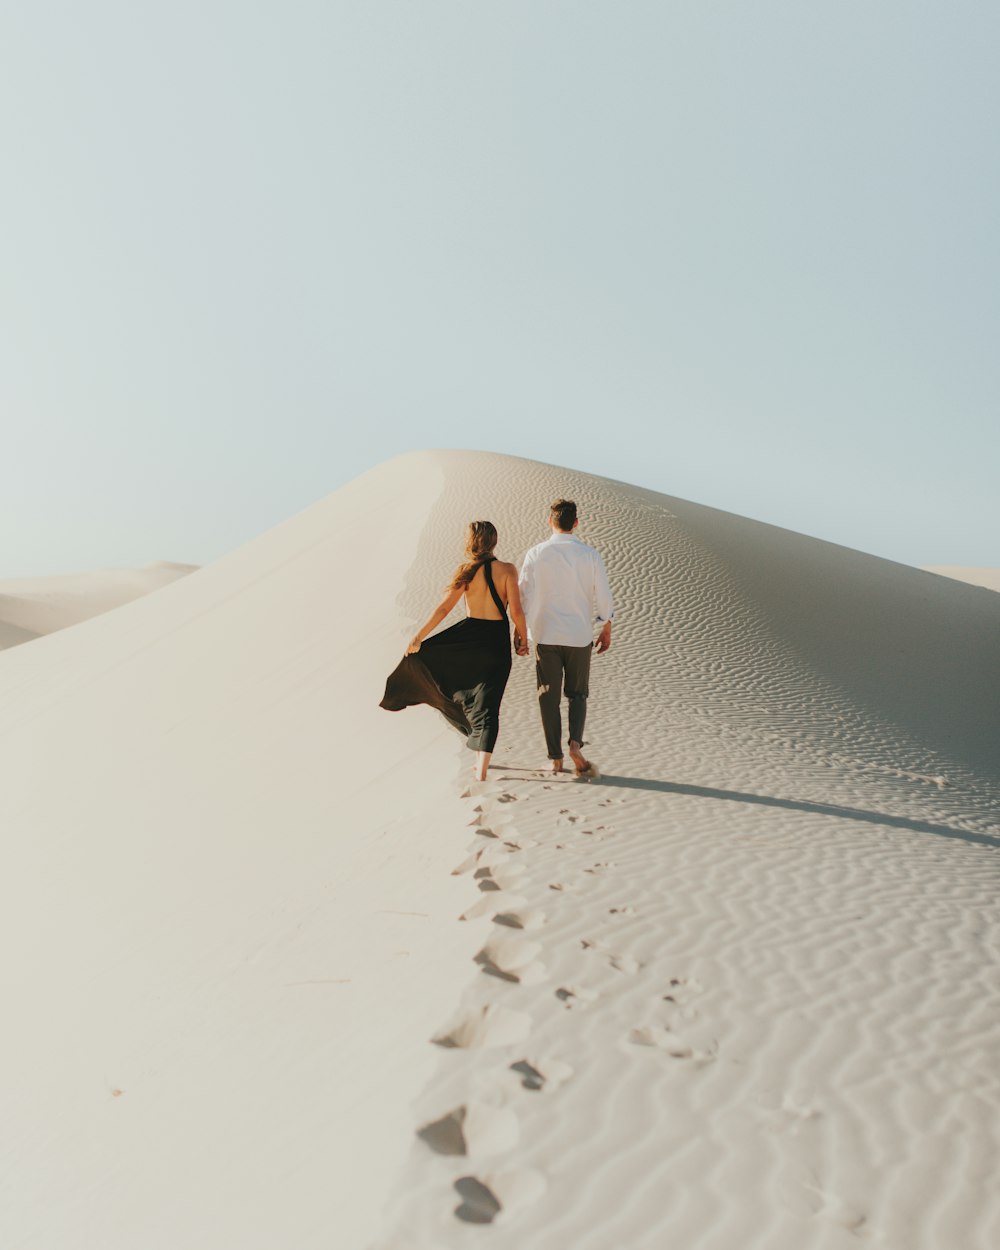 a man and woman walking on a sandy path in the desert